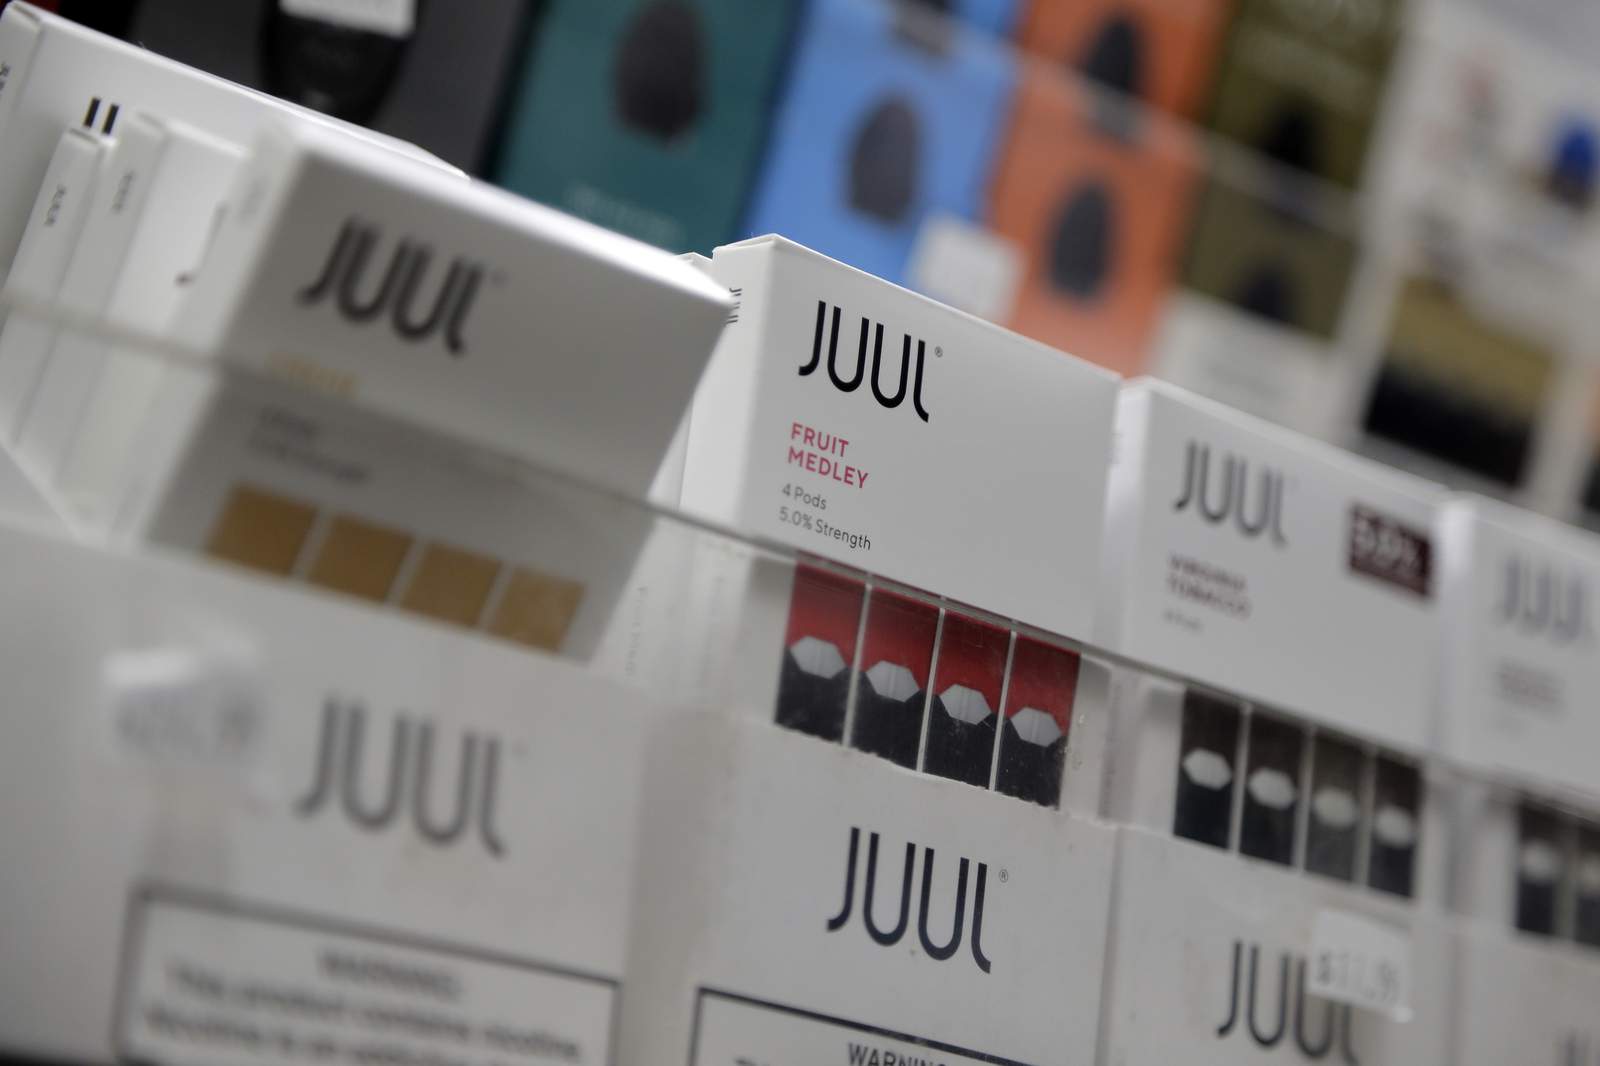 Harris County attorney sues JUUL over ‘deceptive’ marketing practices targeting teens